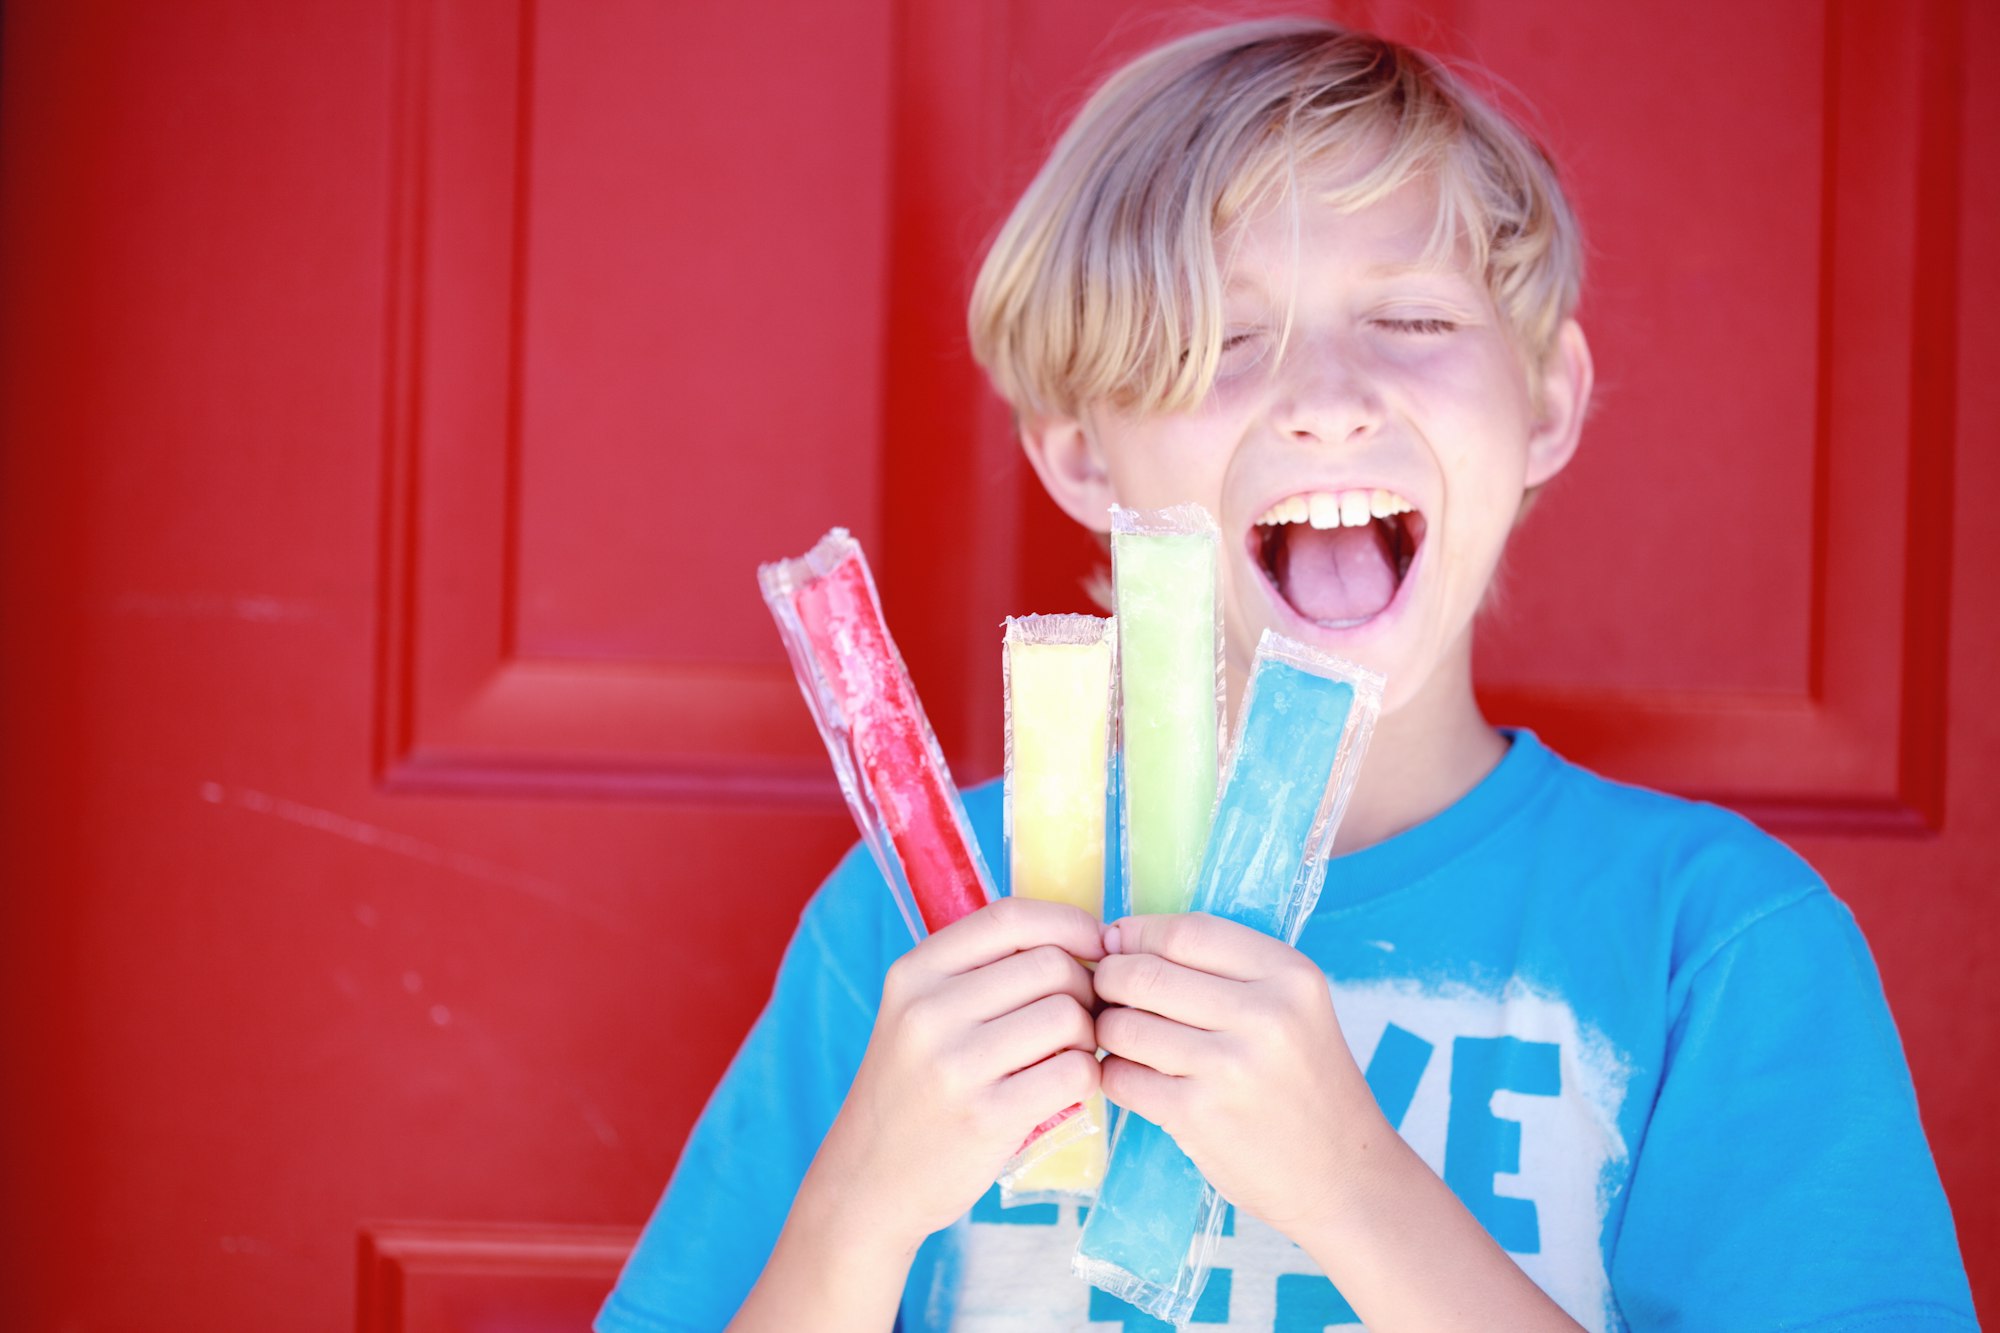 There is nothing quite as nice as yummy frozen treats on a hot summer day!